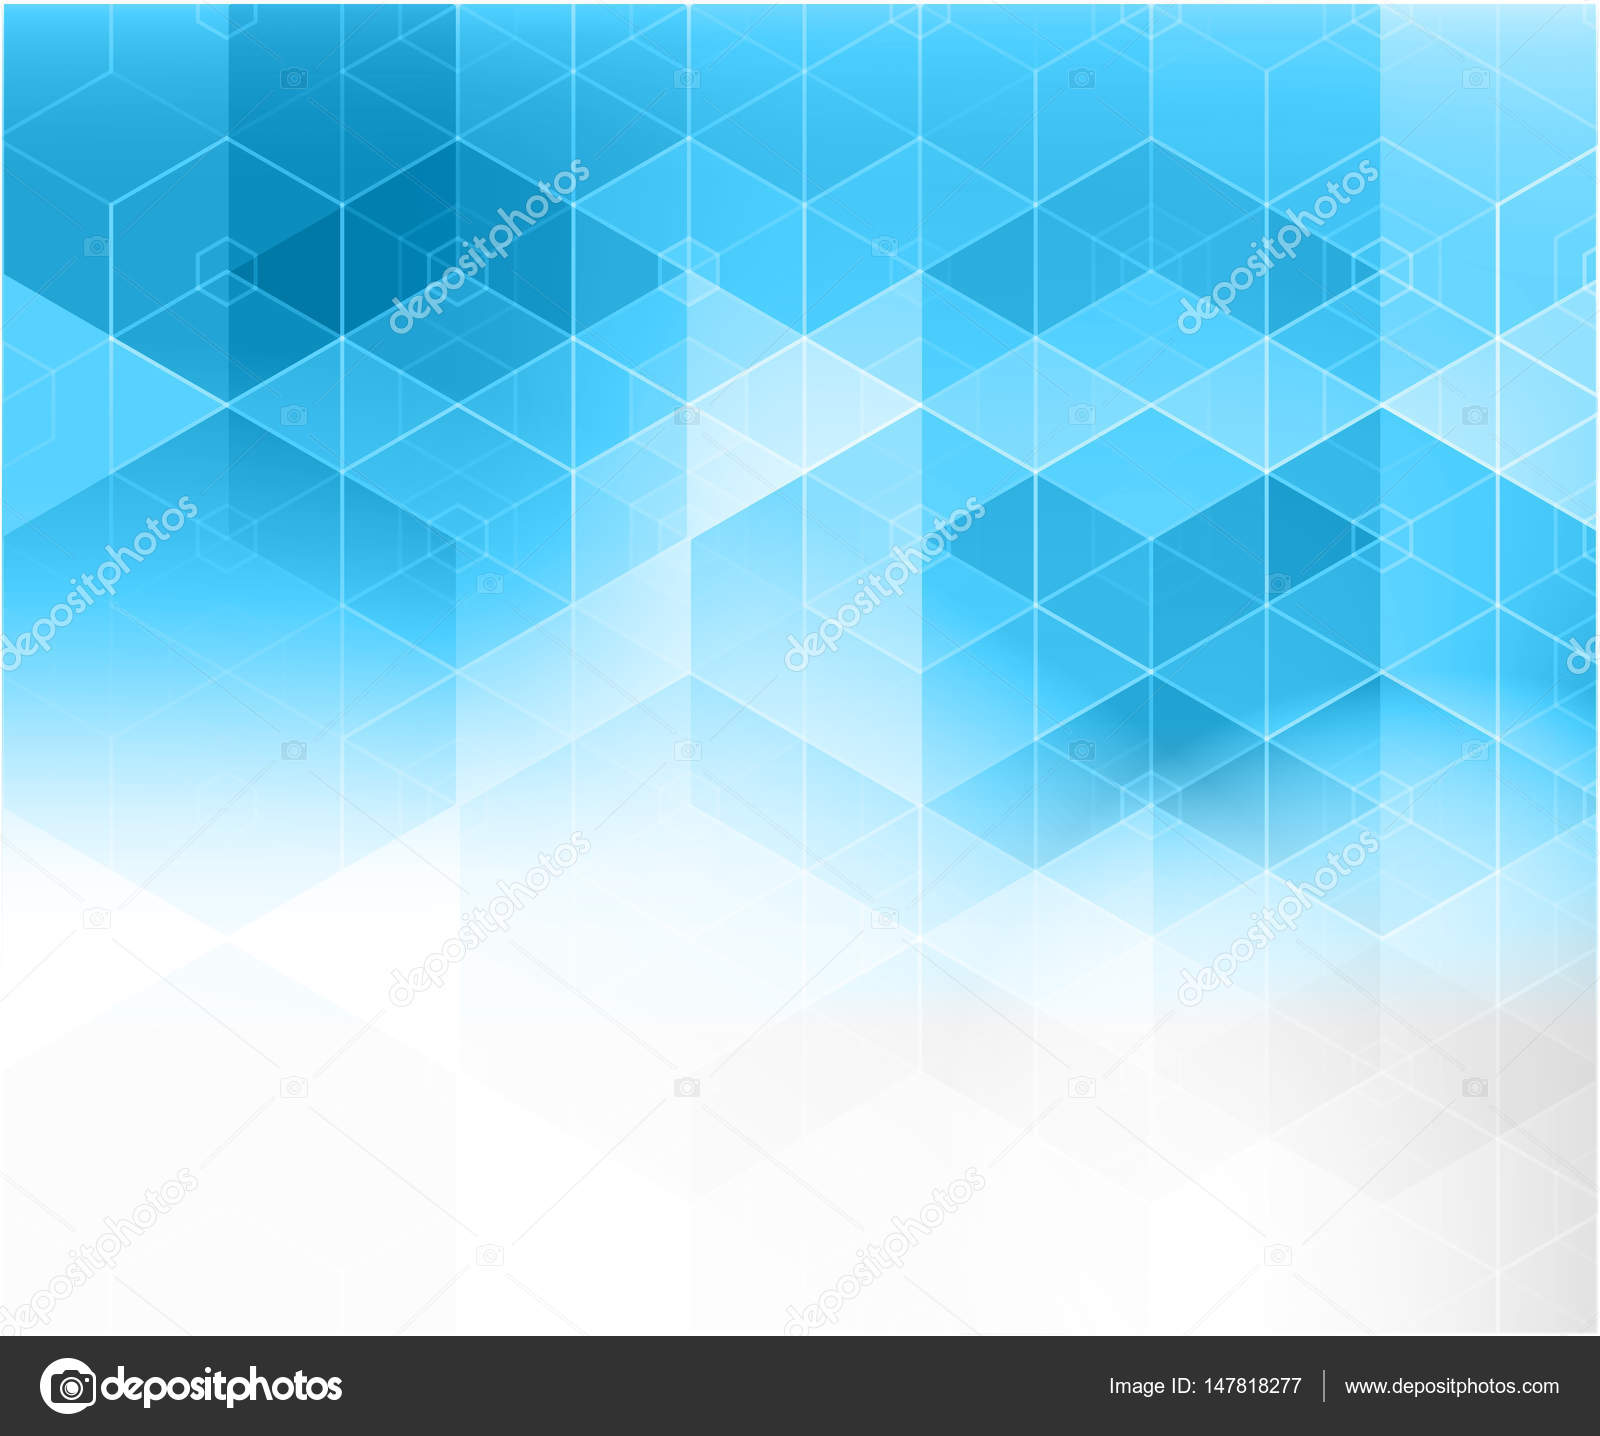 Vector illustration abstract background for your design hexagon ...